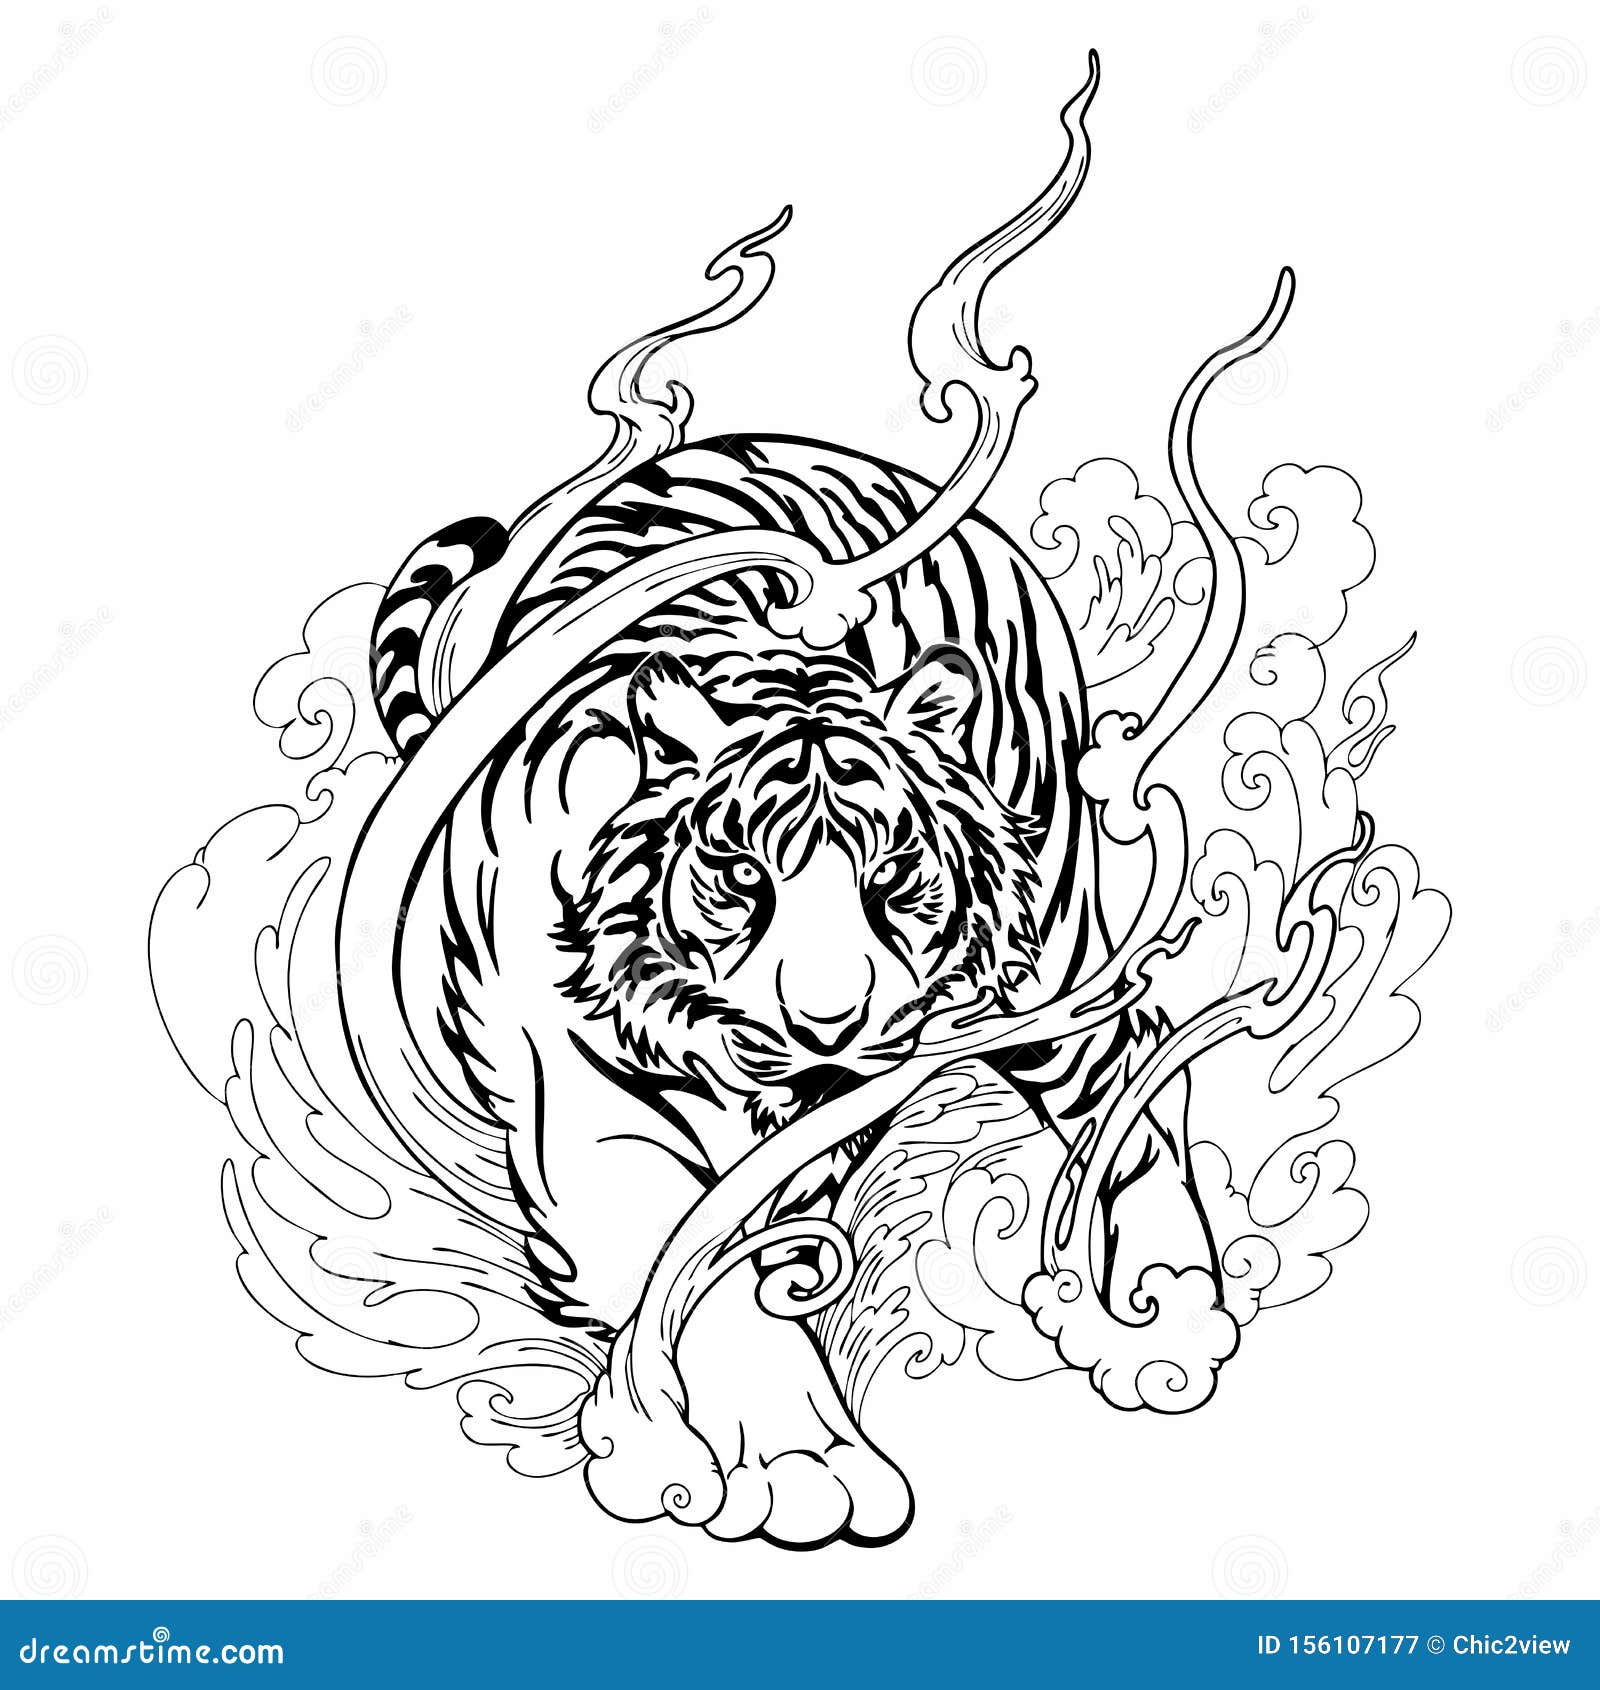 How To Draw A Tiger Tattoo Step by Step Drawing Guide by Dawn  DragoArt